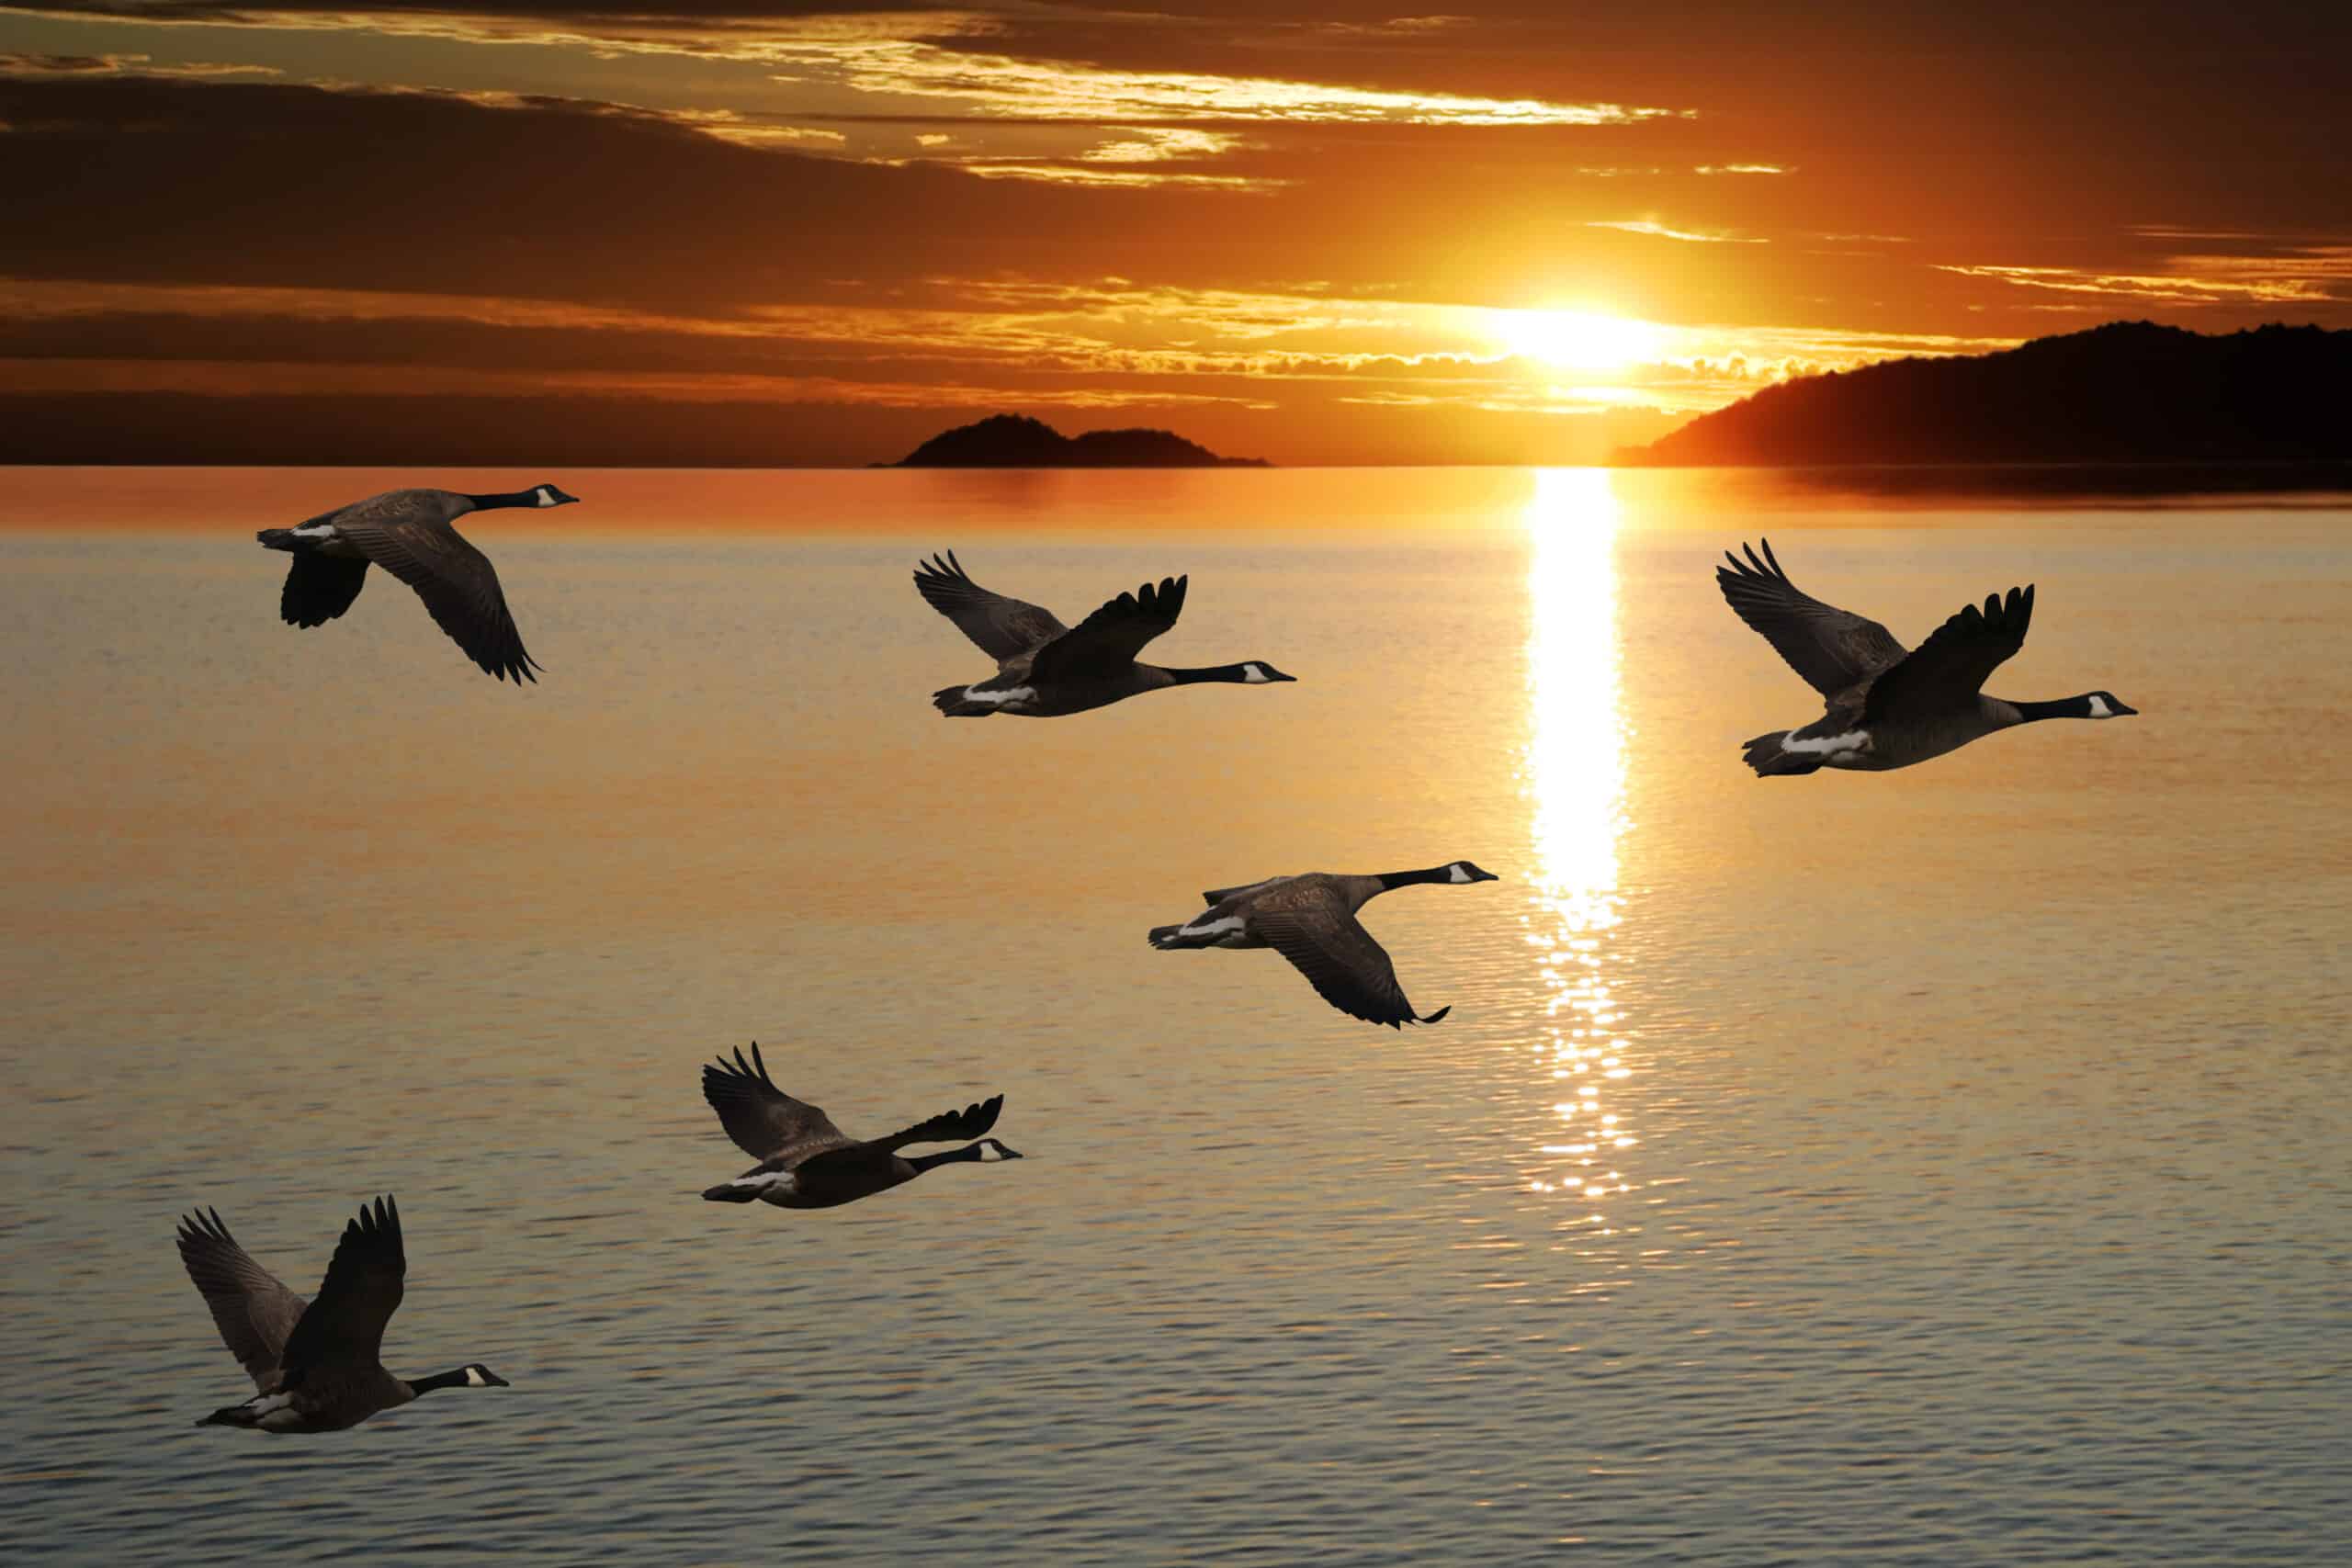 Image of geese flying over a body of water to illustrate a blog post about personal sovereignty